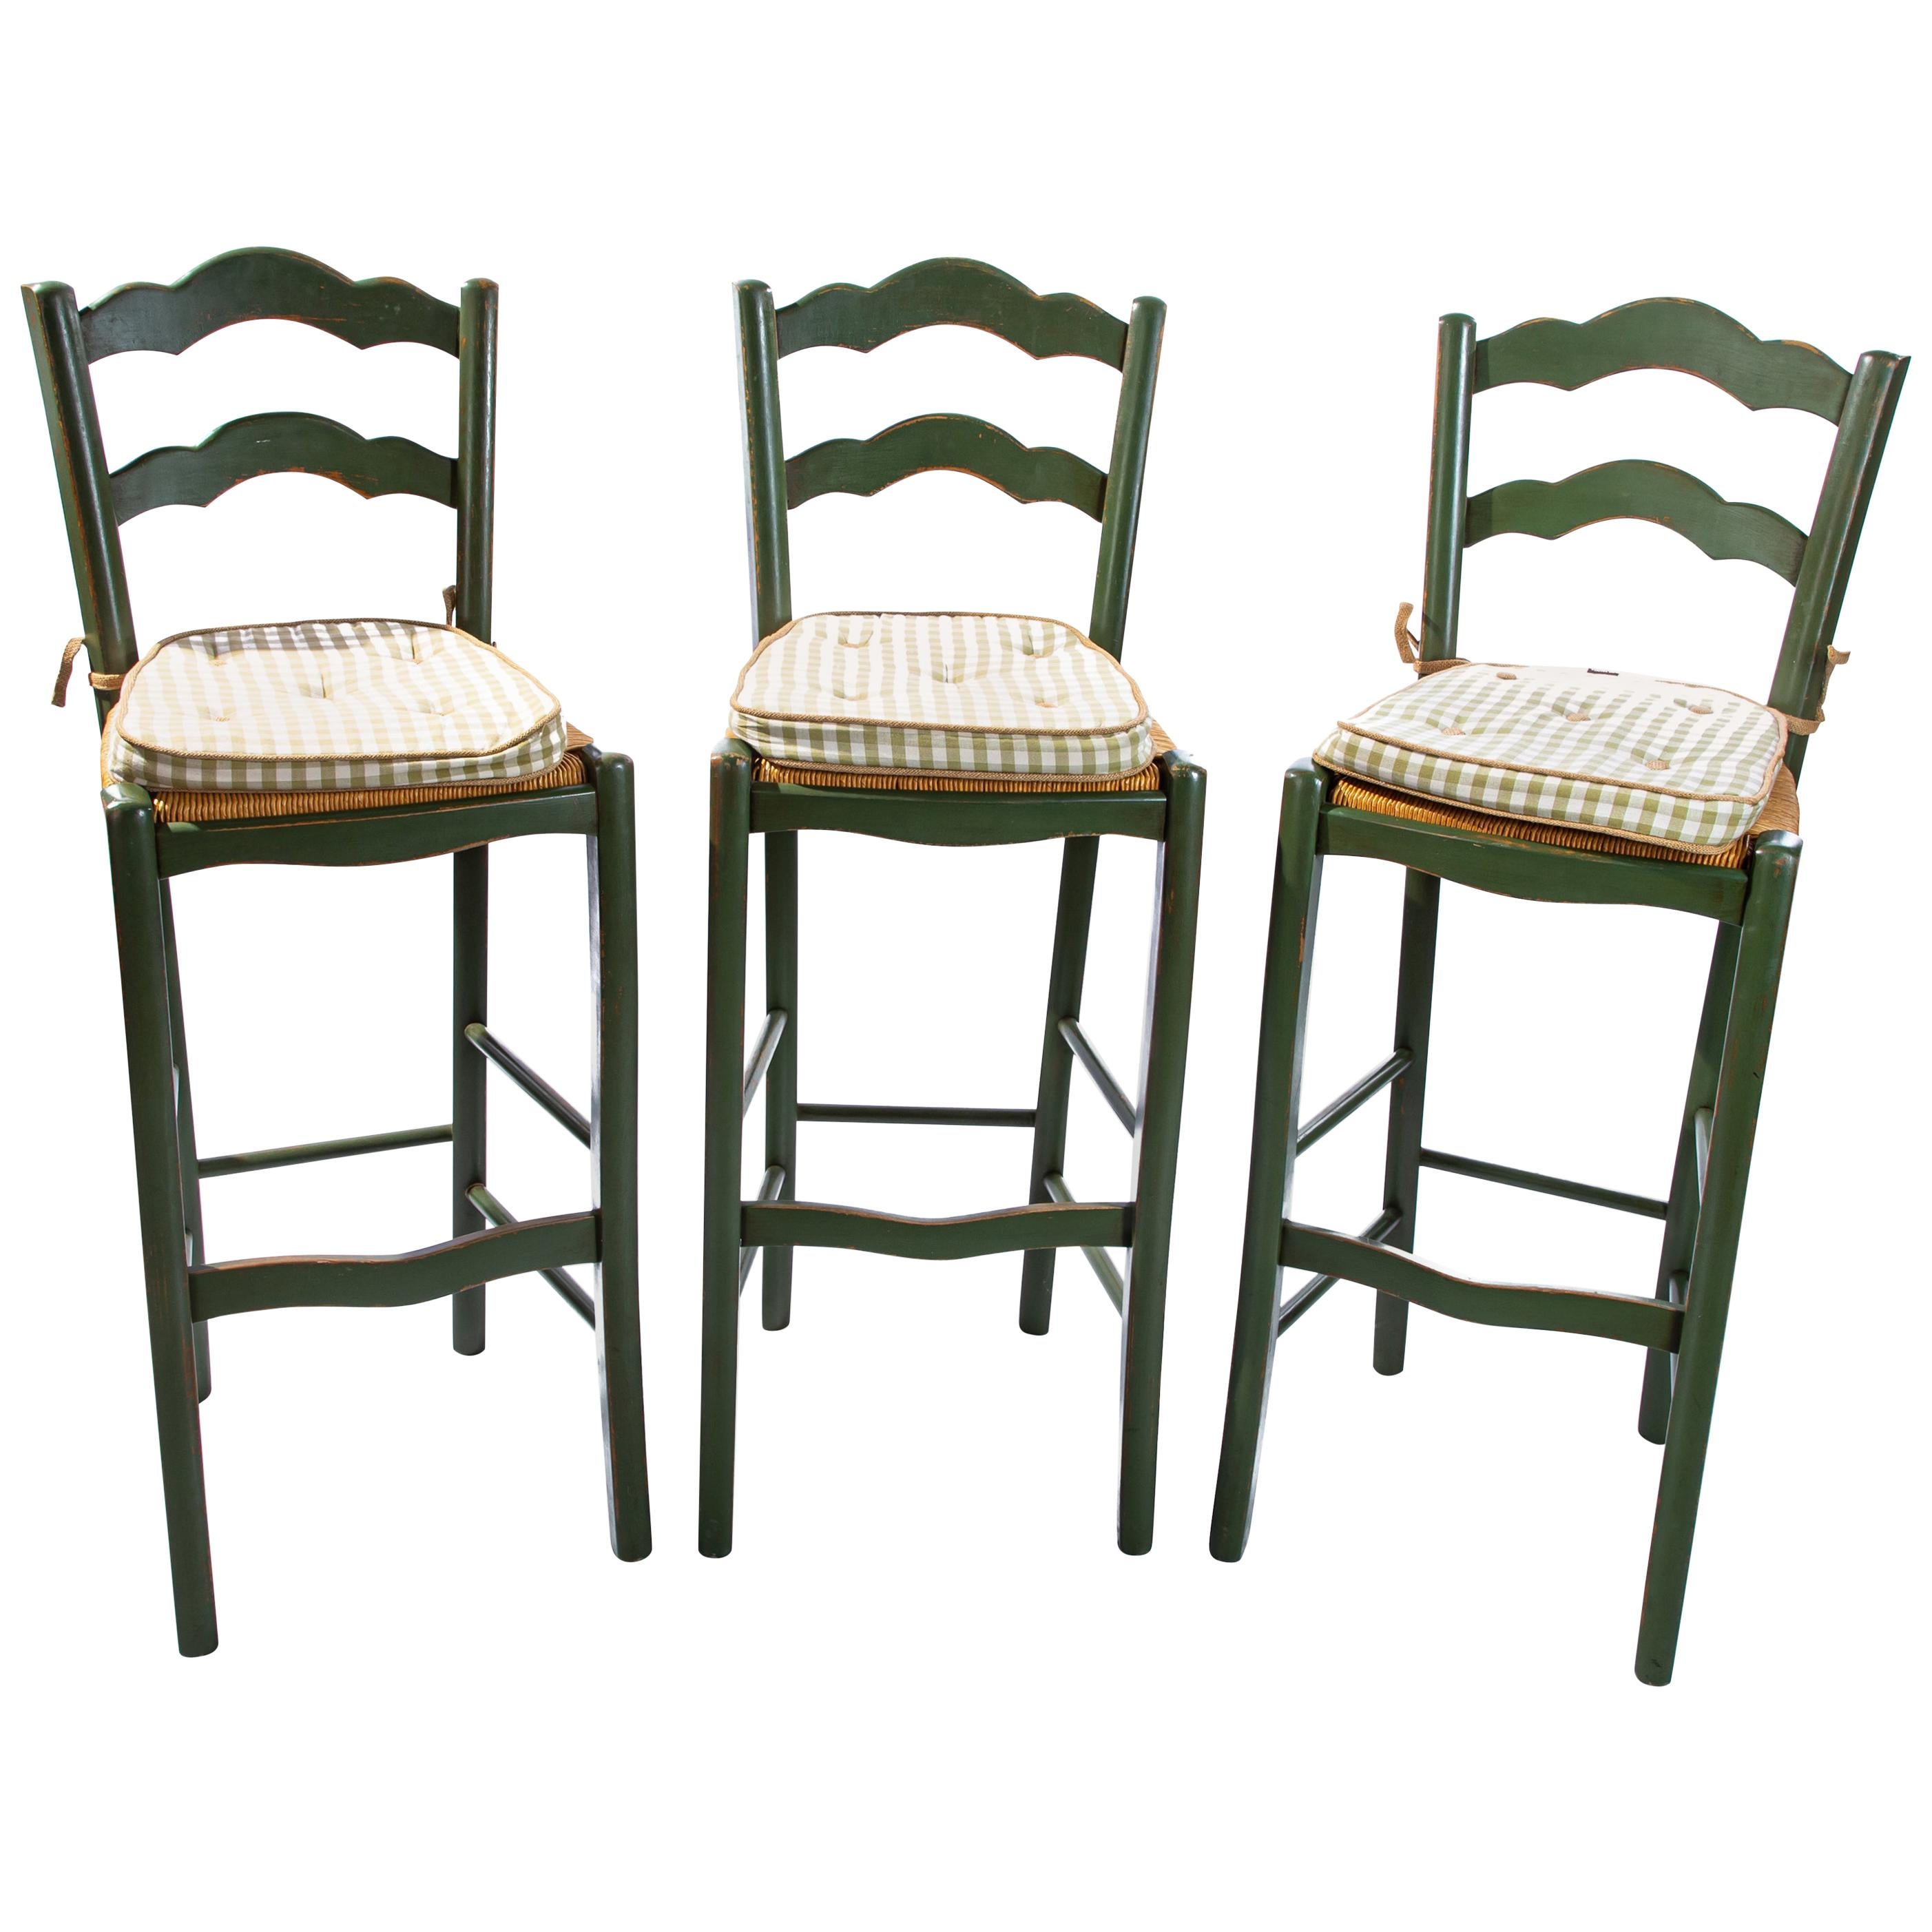 Italian Barstools with Plaid Seat Cushions For Sale